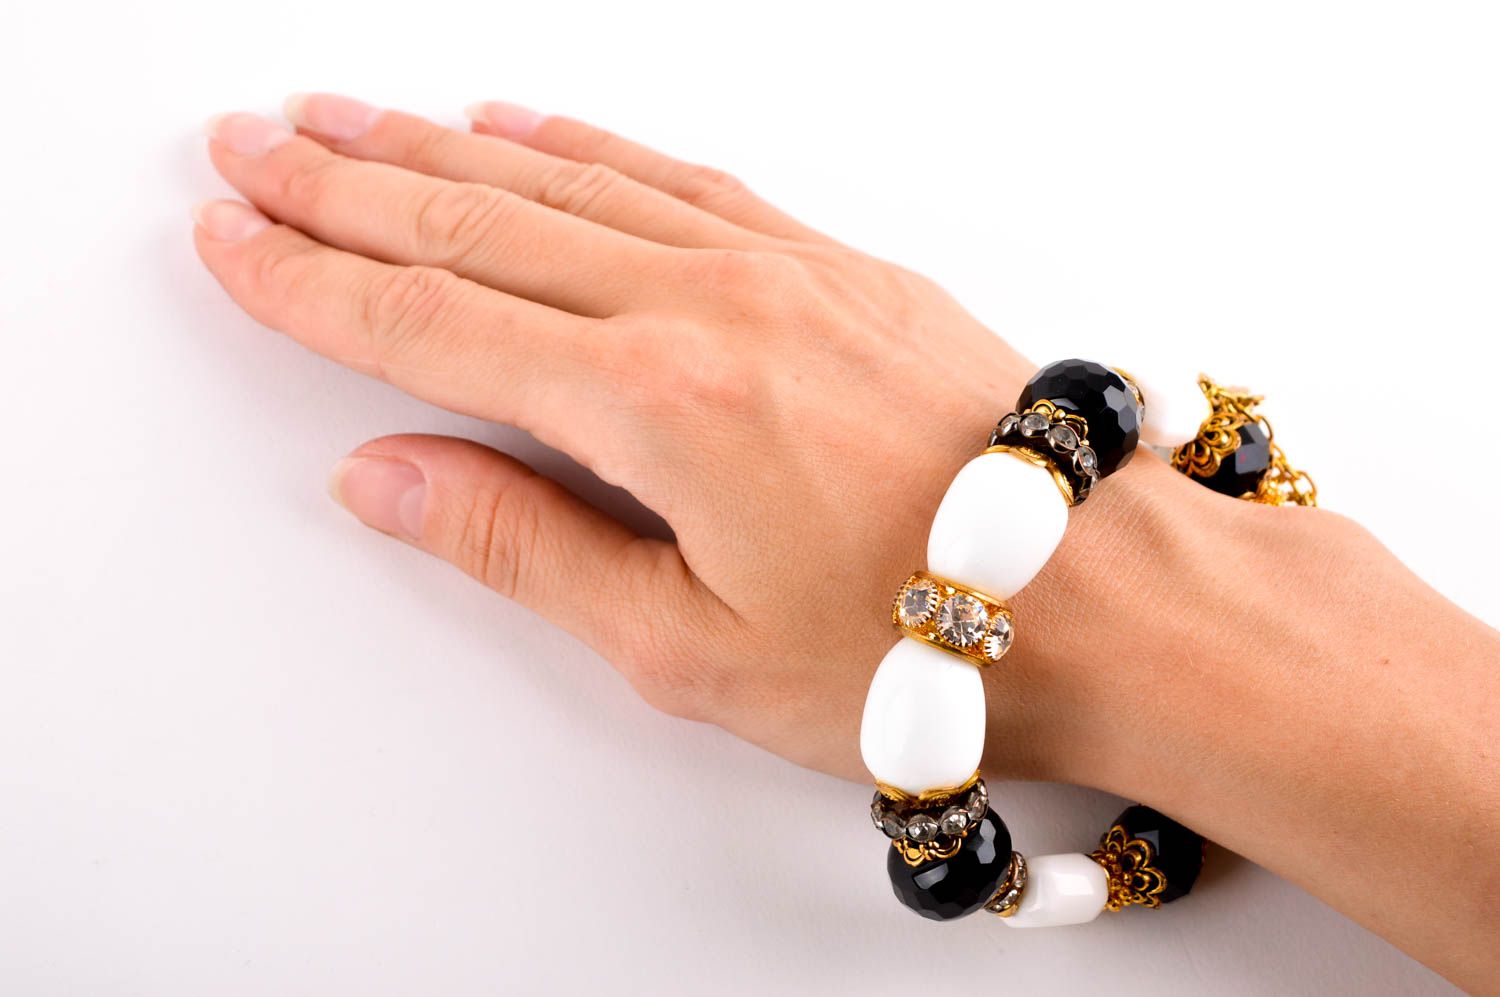 Handmade gemstone beaded bracelet with black and white beads and gold color charms for girls photo 5